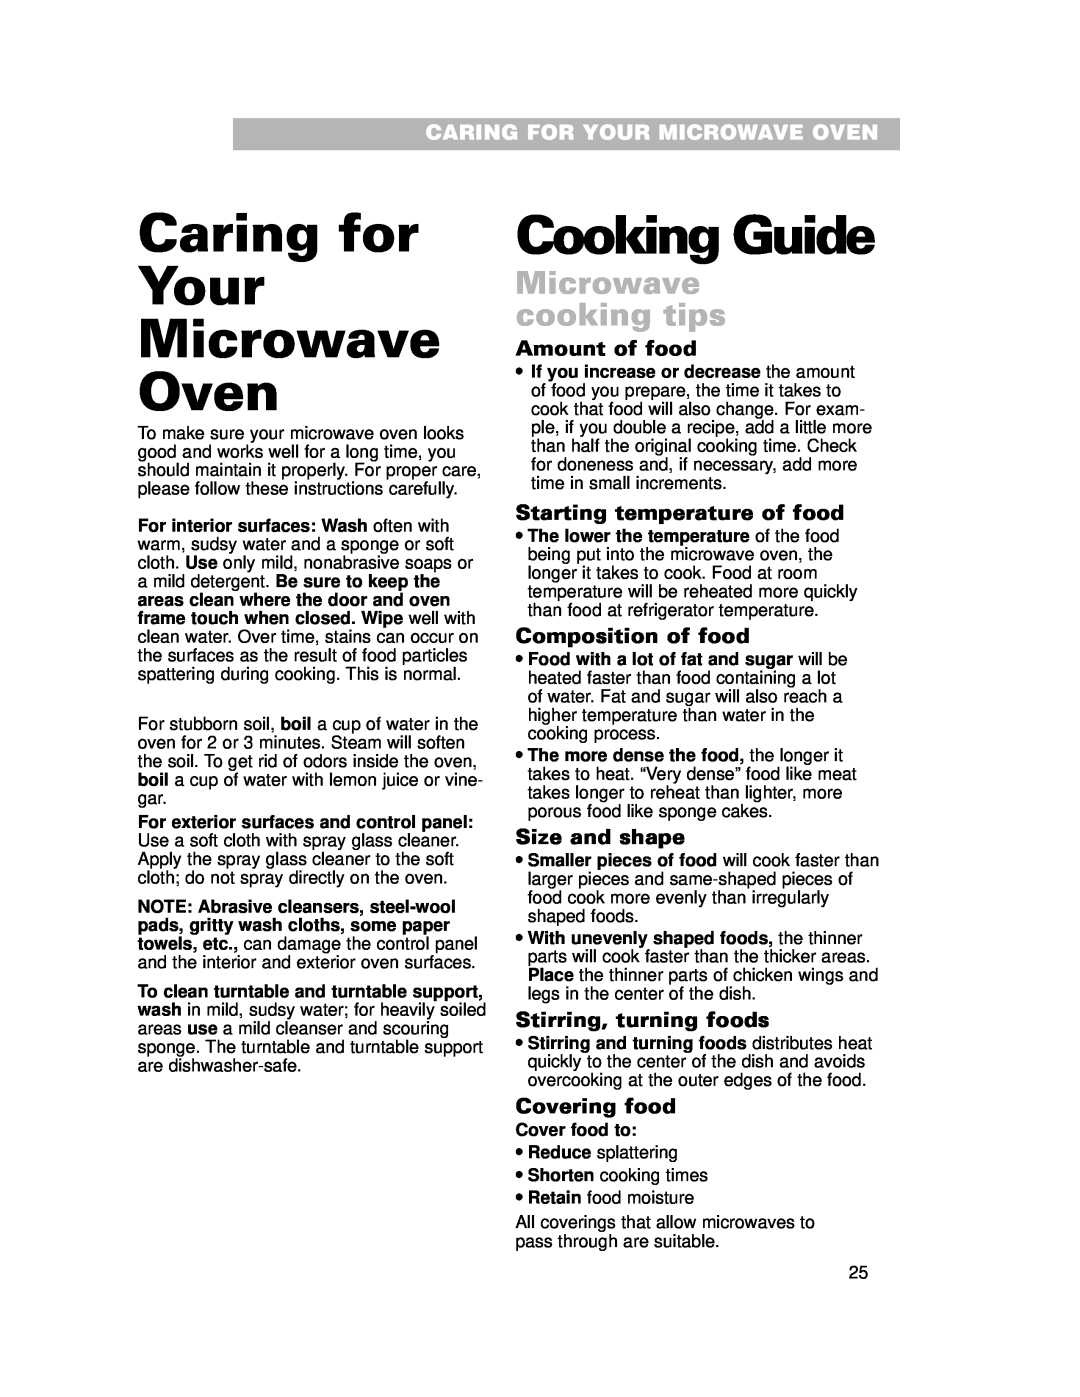 Whirlpool CMT102SG Caring for Your Microwave Oven, Cooking Guide, Microwave cooking tips, Caring For Your Microwave Oven 